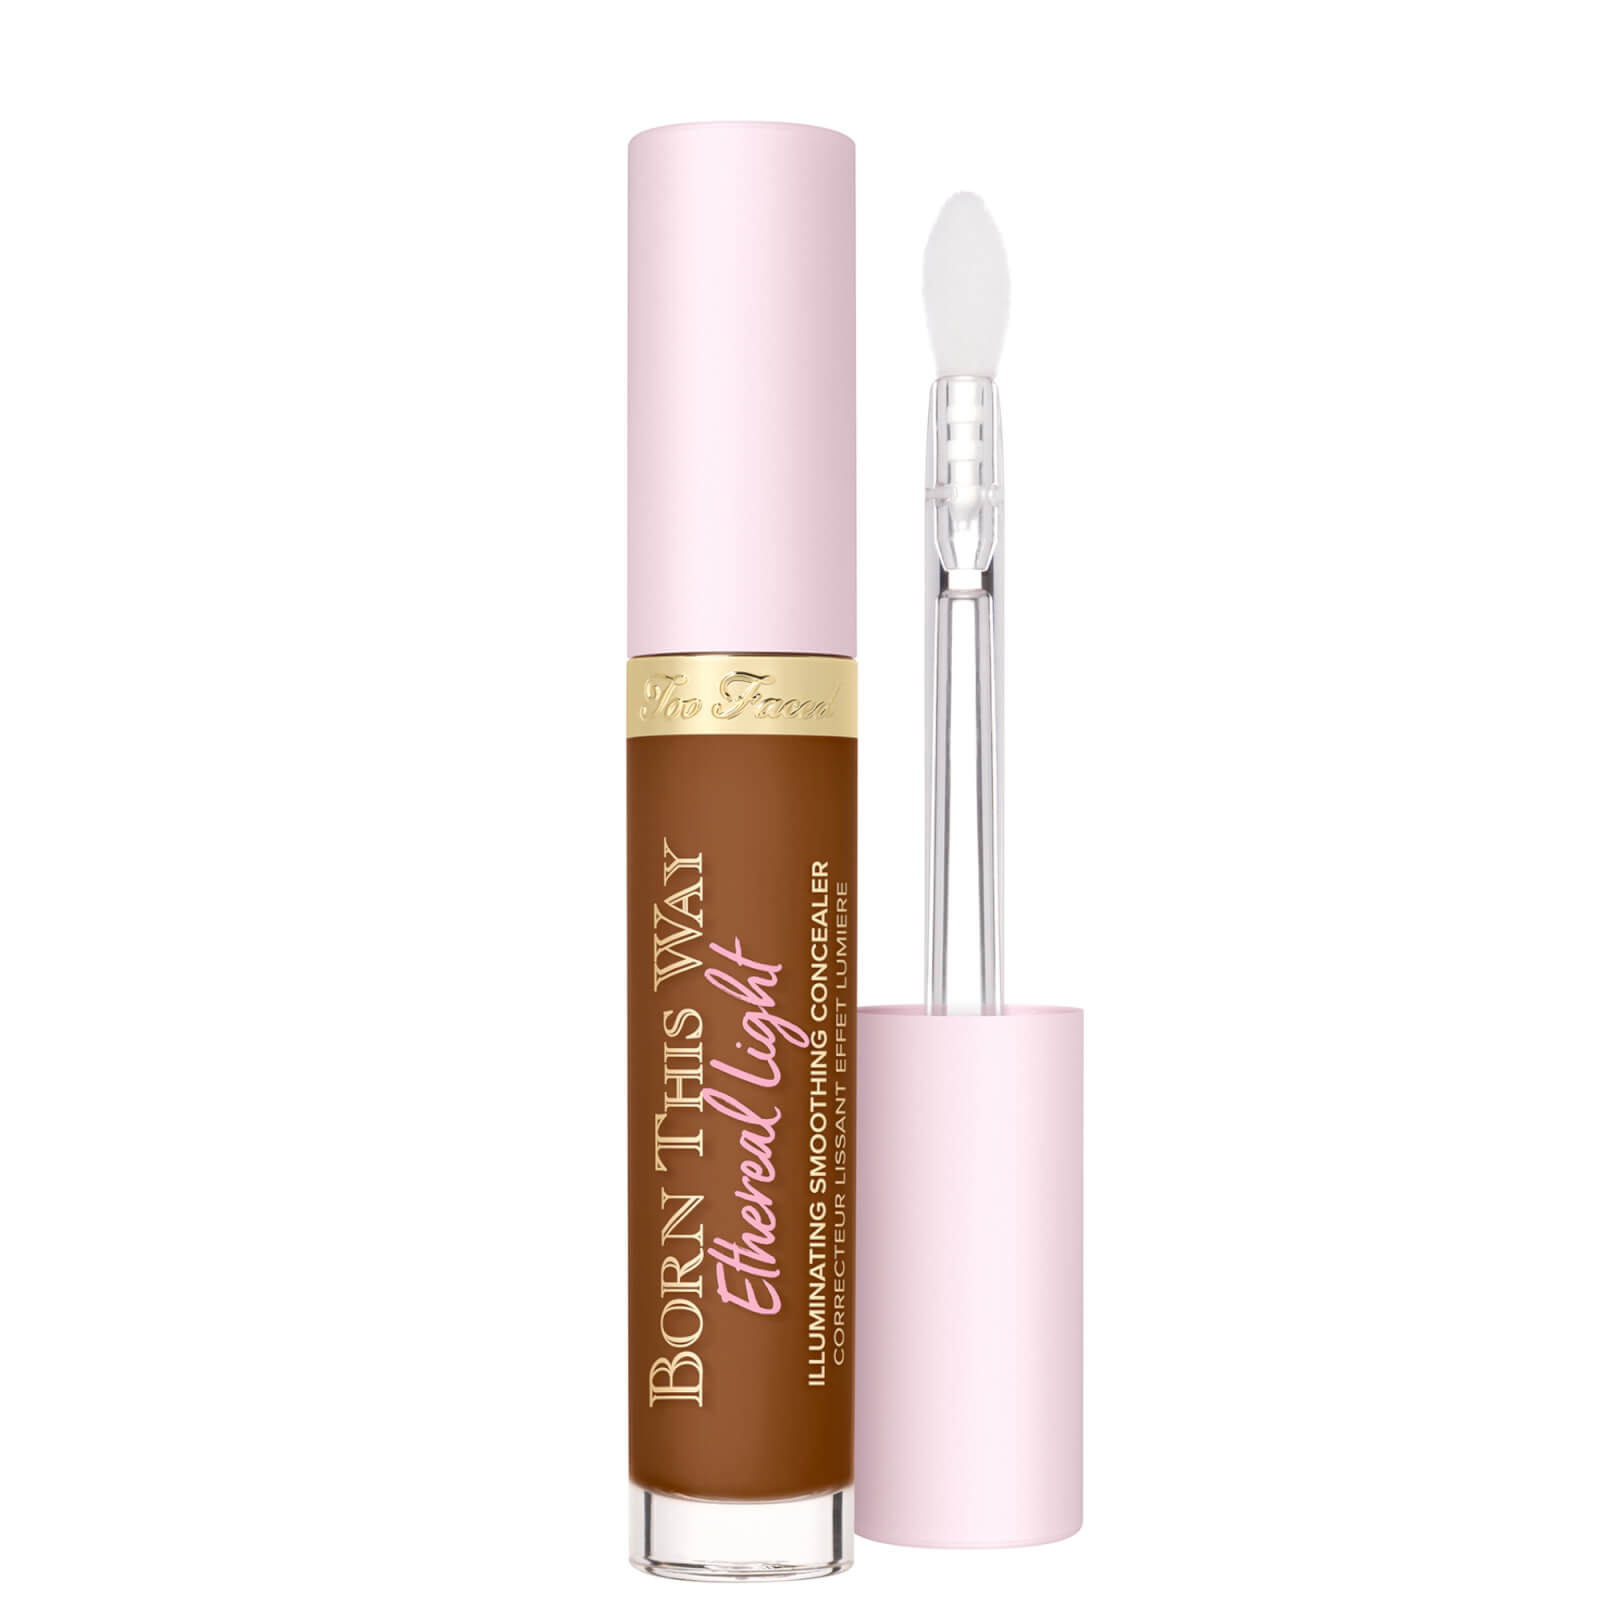 Too Faced Born This Way Ethereal Light Illuminating Smoothing Concealer 15ml (Various Shades) - Hot Cocoa